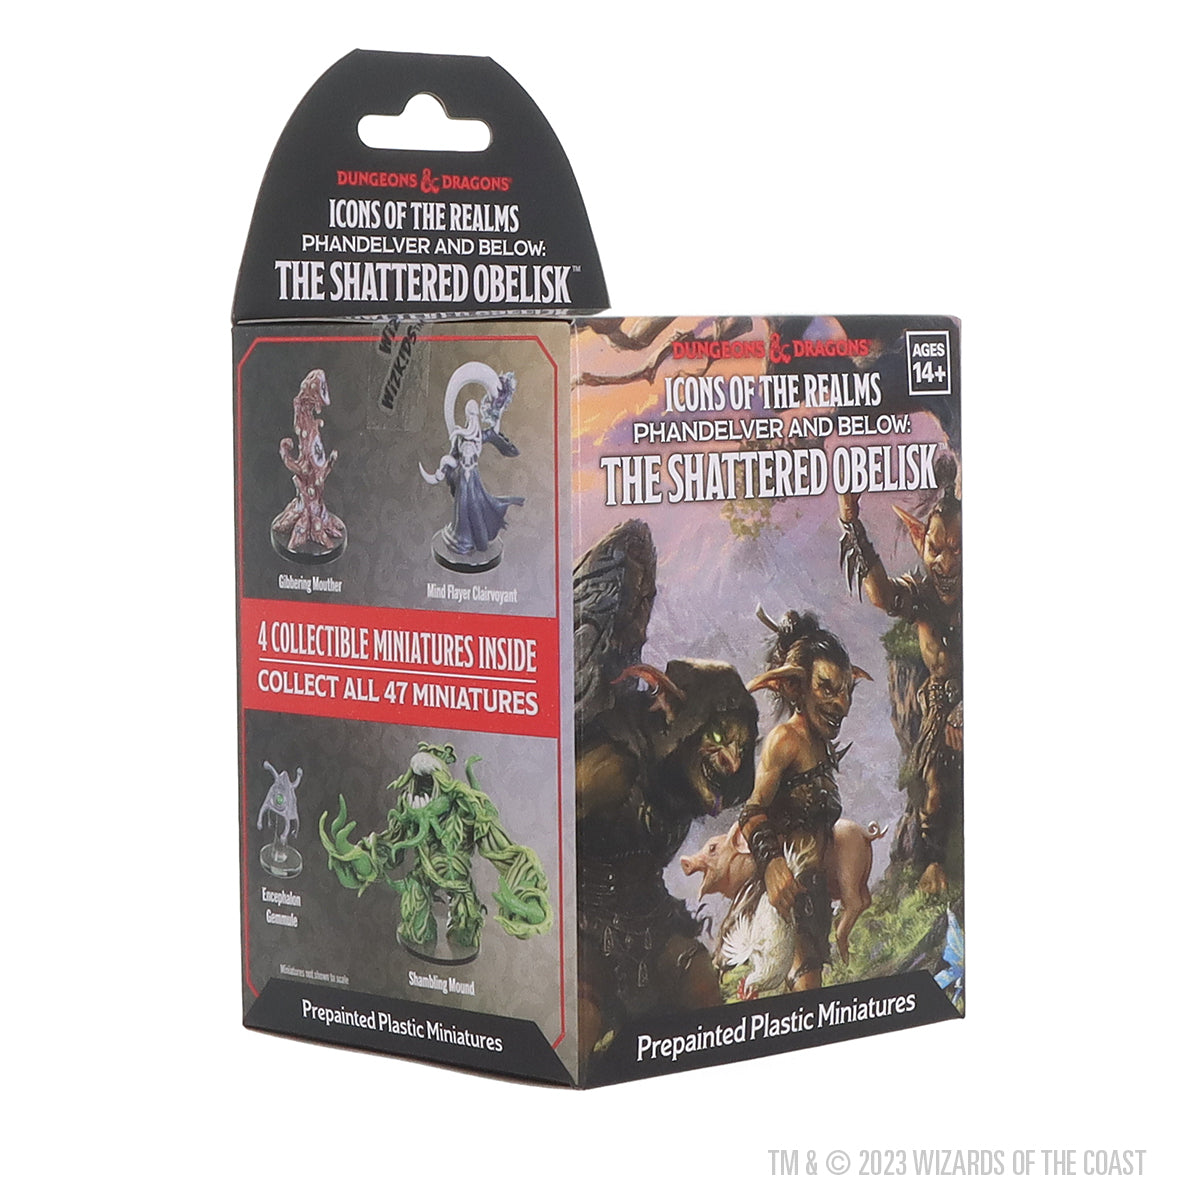 Dungeons & Dragons: Icons of the Realms: Phandelver & Below: The Shattered Obelisk Booster